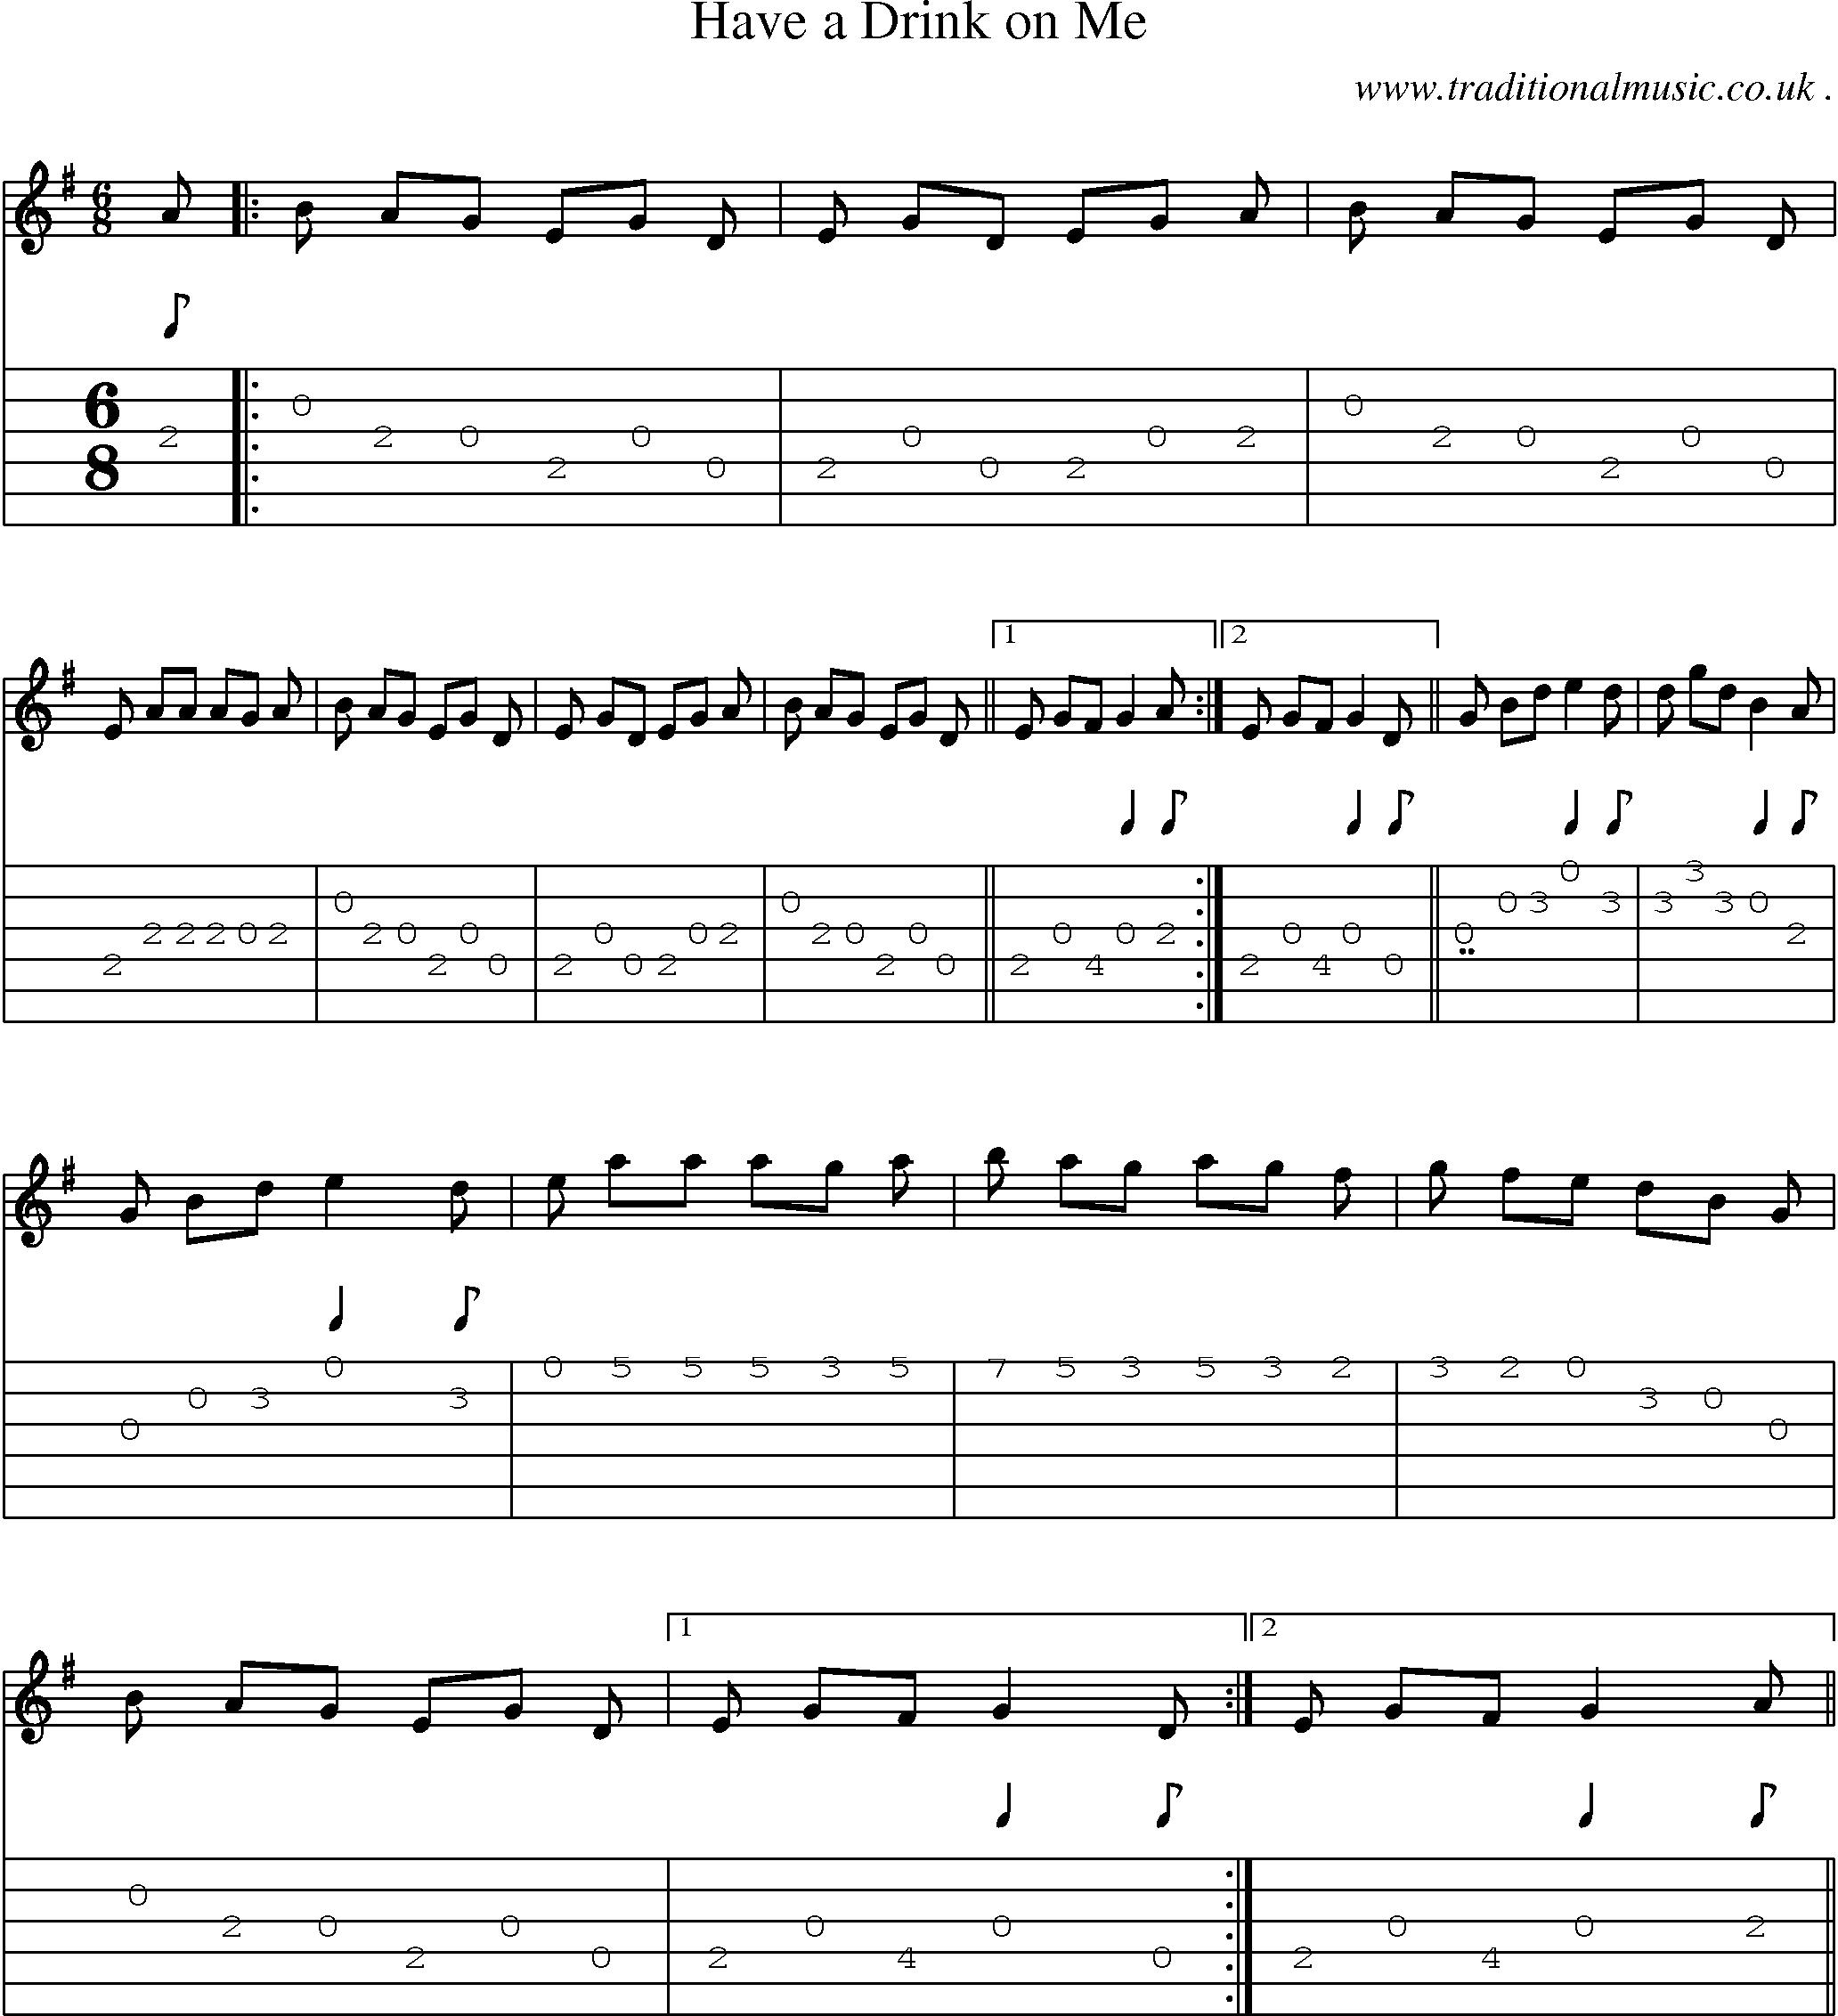 Sheet-Music and Guitar Tabs for Have A Drink On Me